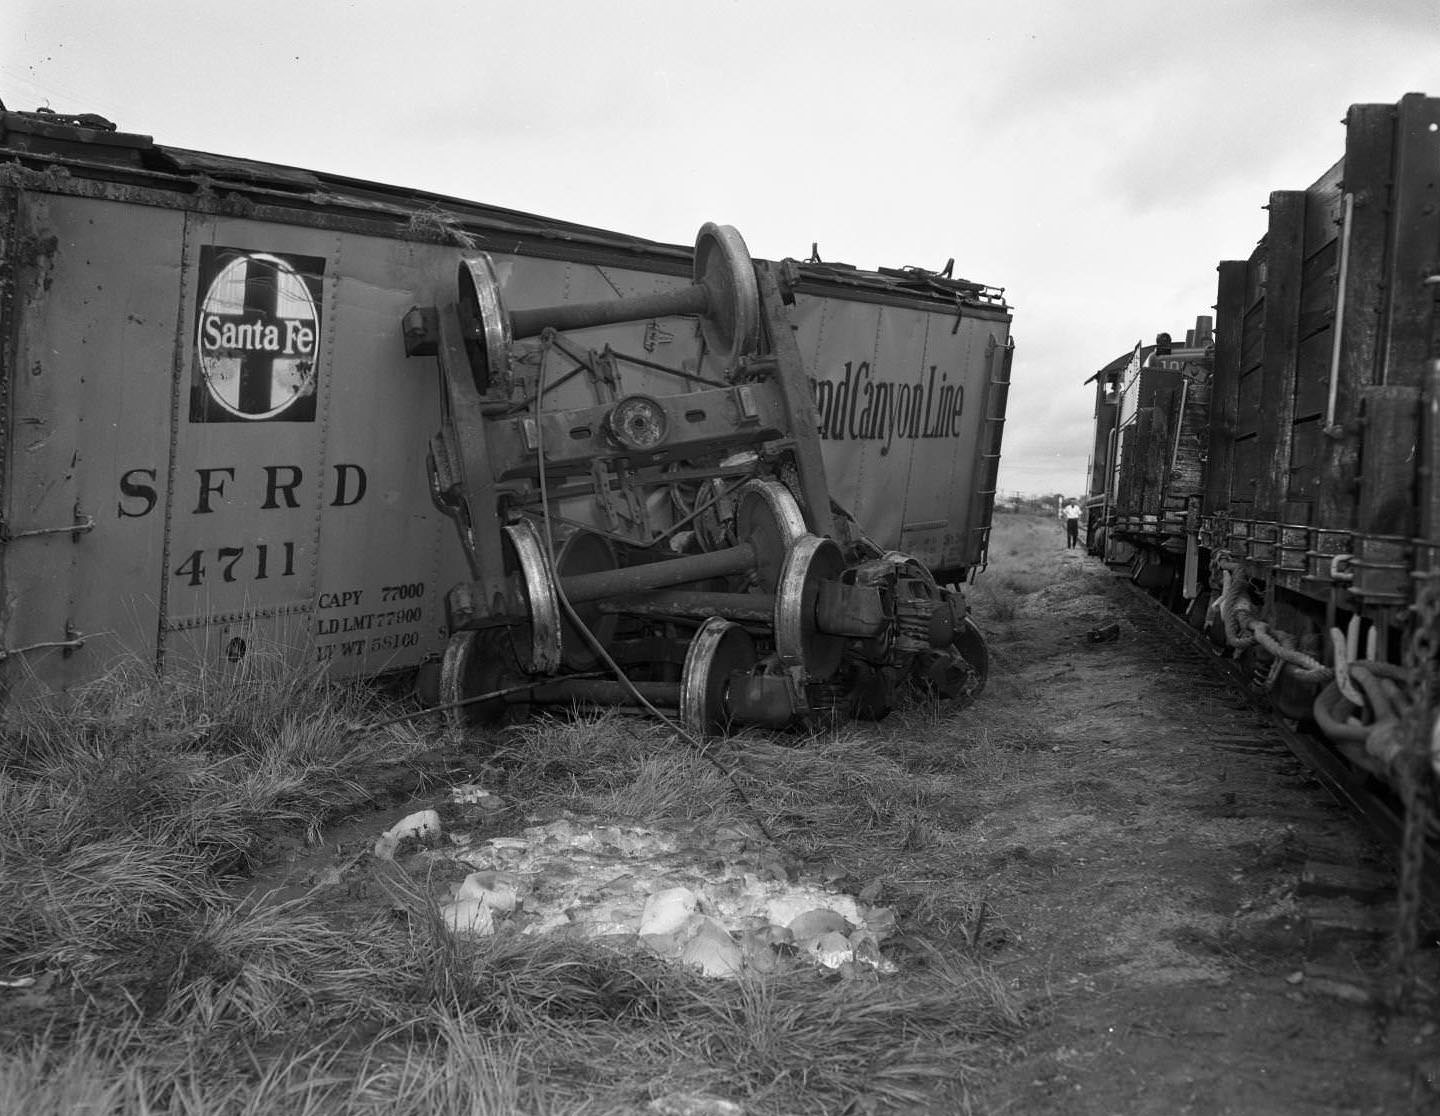 Train Wreck by Central Texas Iron Works, 1955